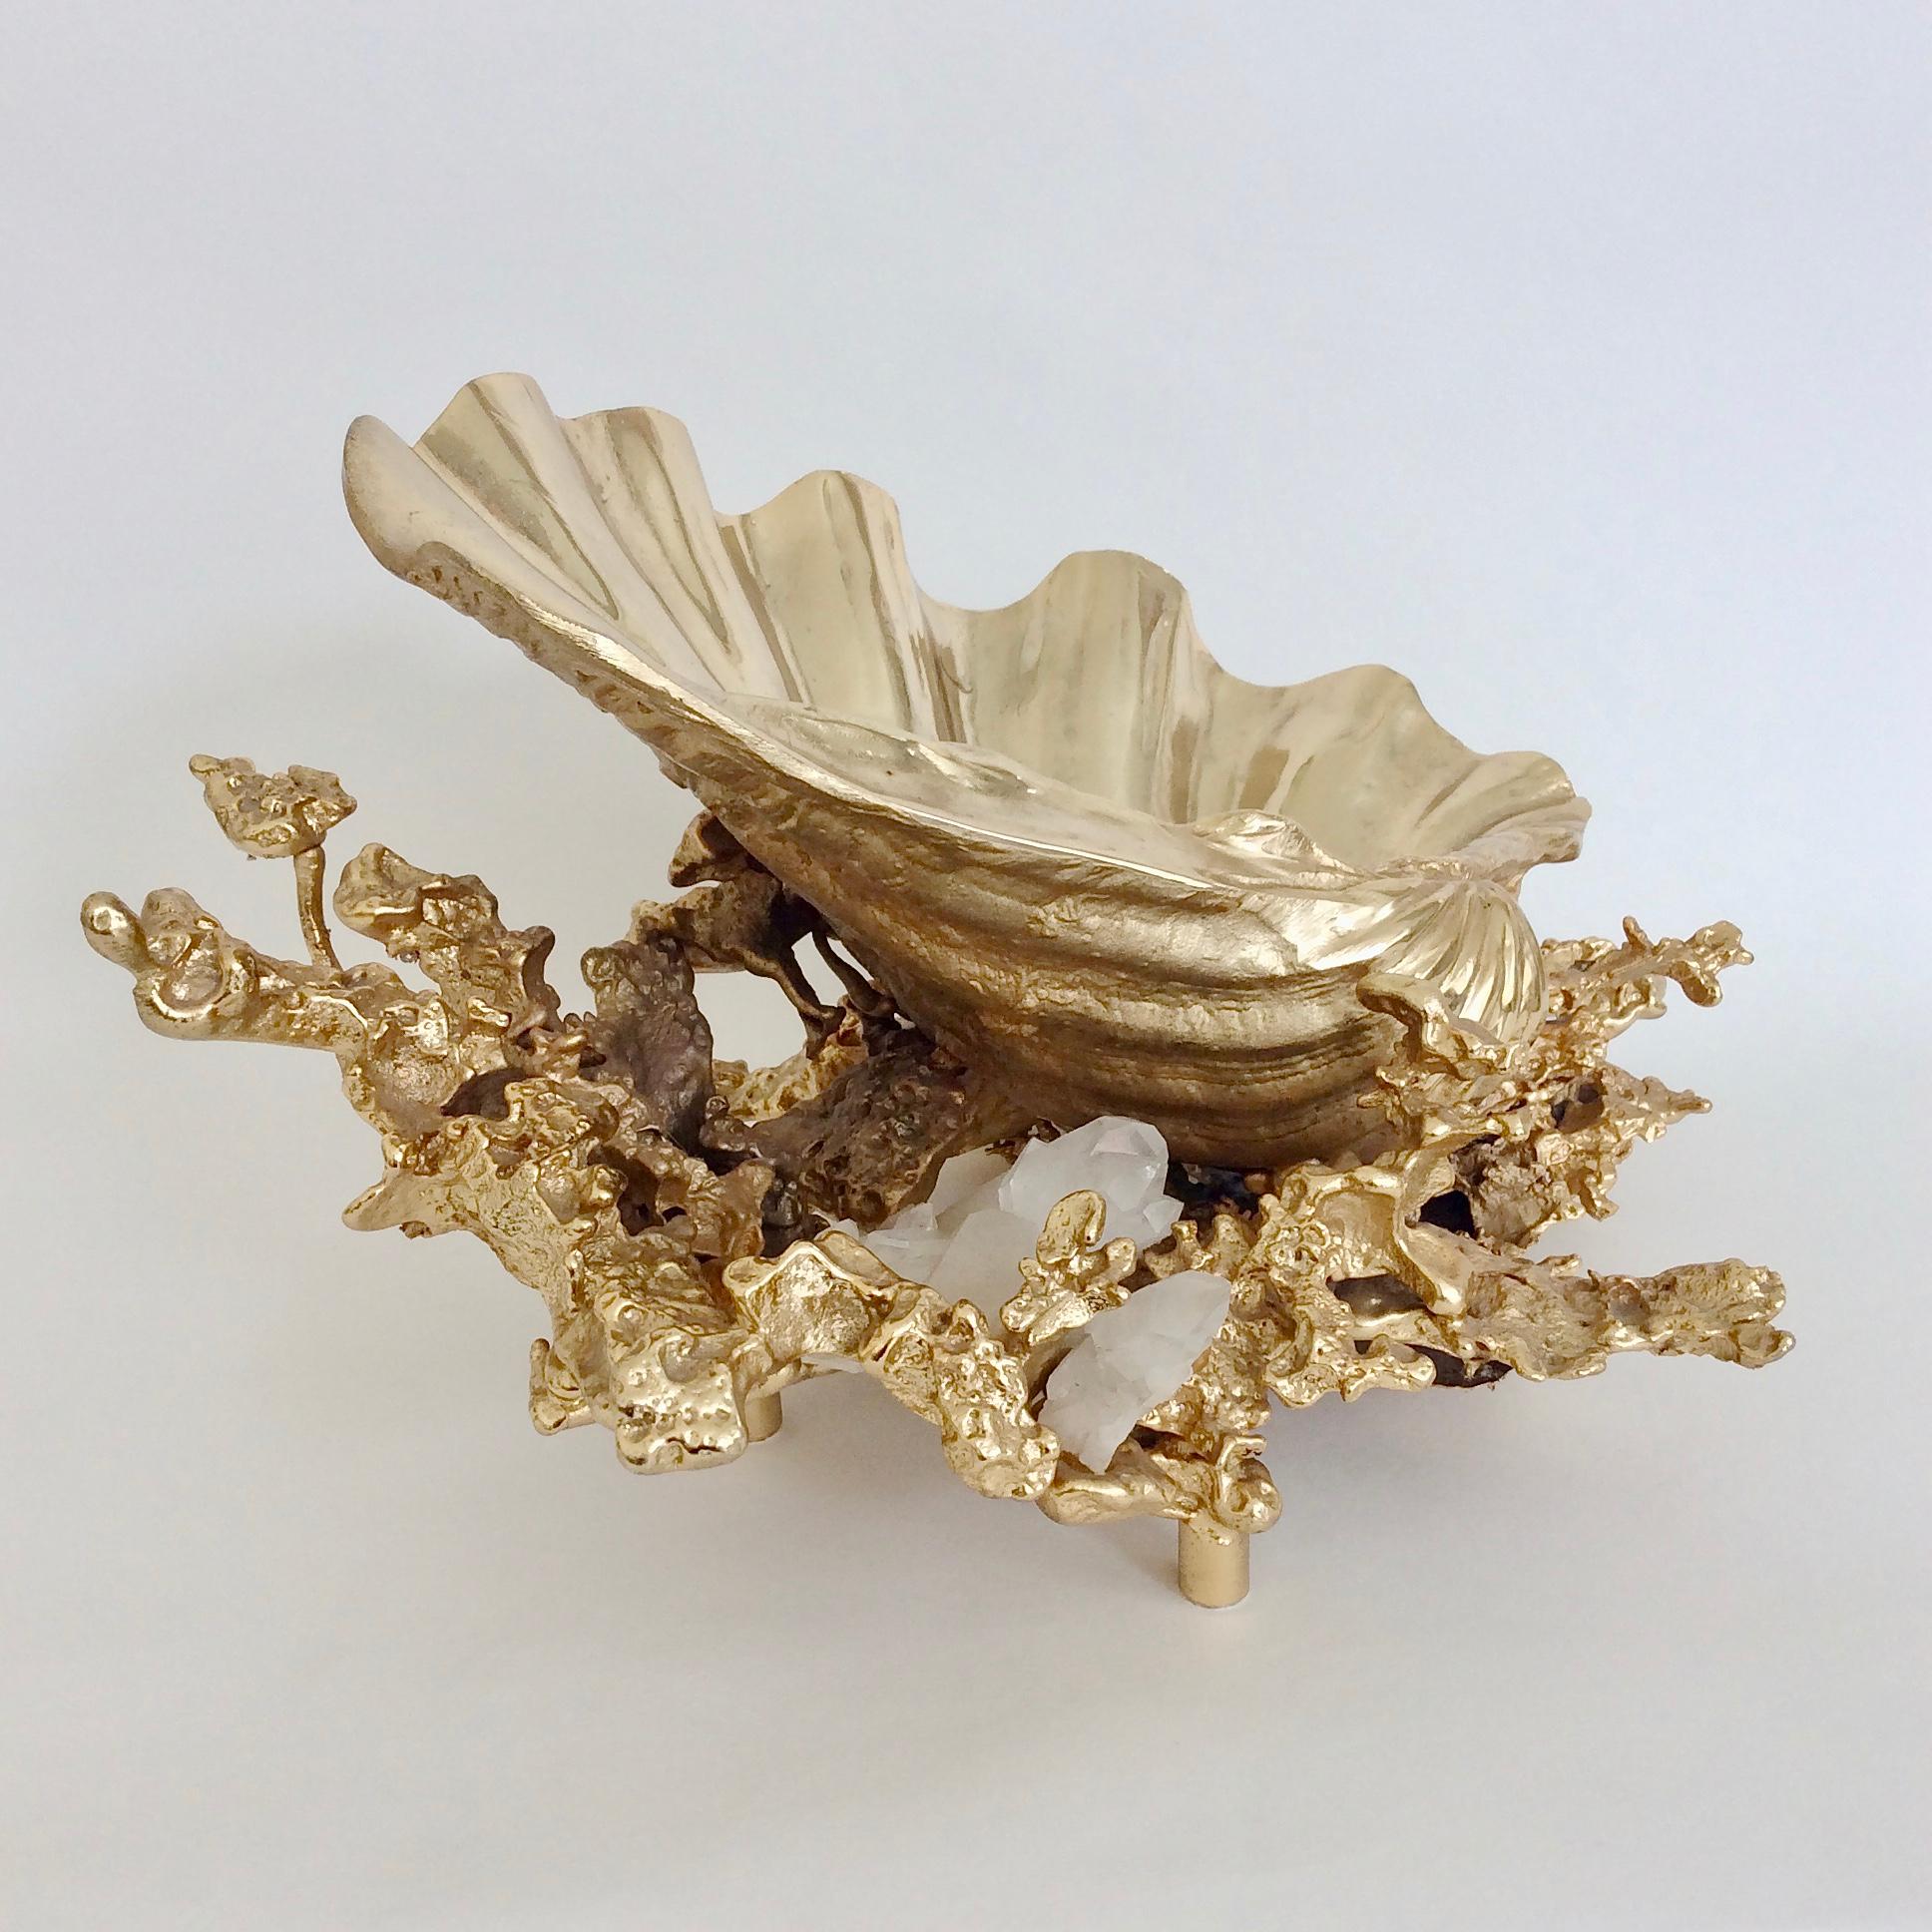 Nice sculptural Claude Victor Boeltz table centerpiece, circa 1980, France.
Gold-plated bronze and white quartz.
Dimensions: 38 cm W, 20 cm H, 30 cm D.
Good original condition.
All purchases are covered by our Buyer Protection Guarantee.
This item